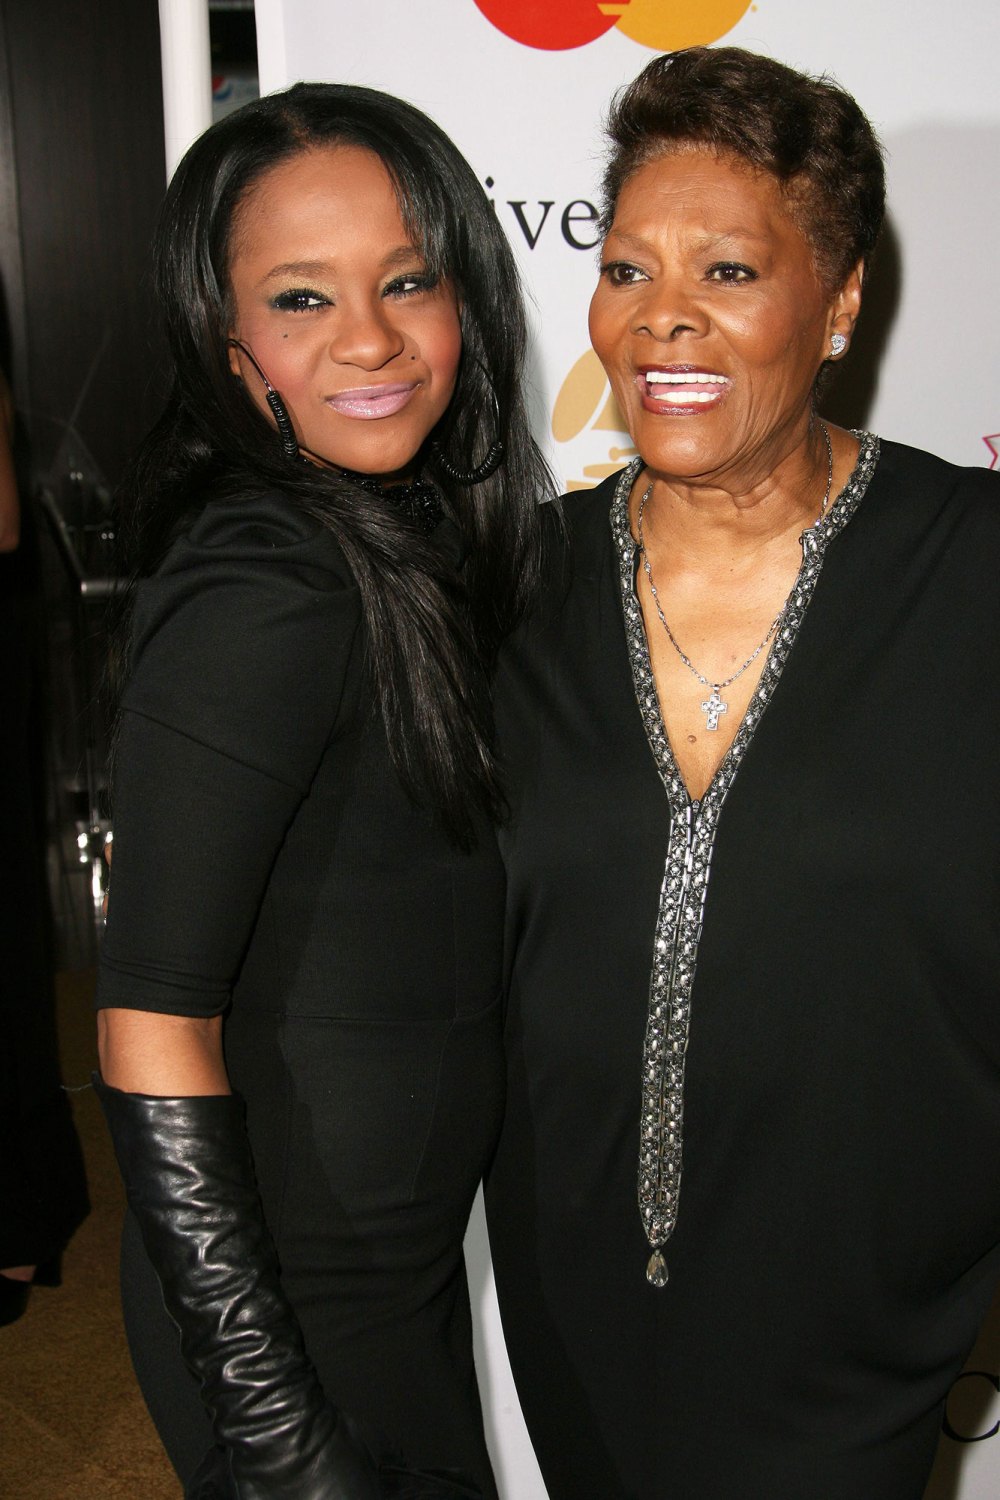 Dionne Warwick Remembers Bobbi Kristina Brown After Her Death: “She Was a Sweetheart”